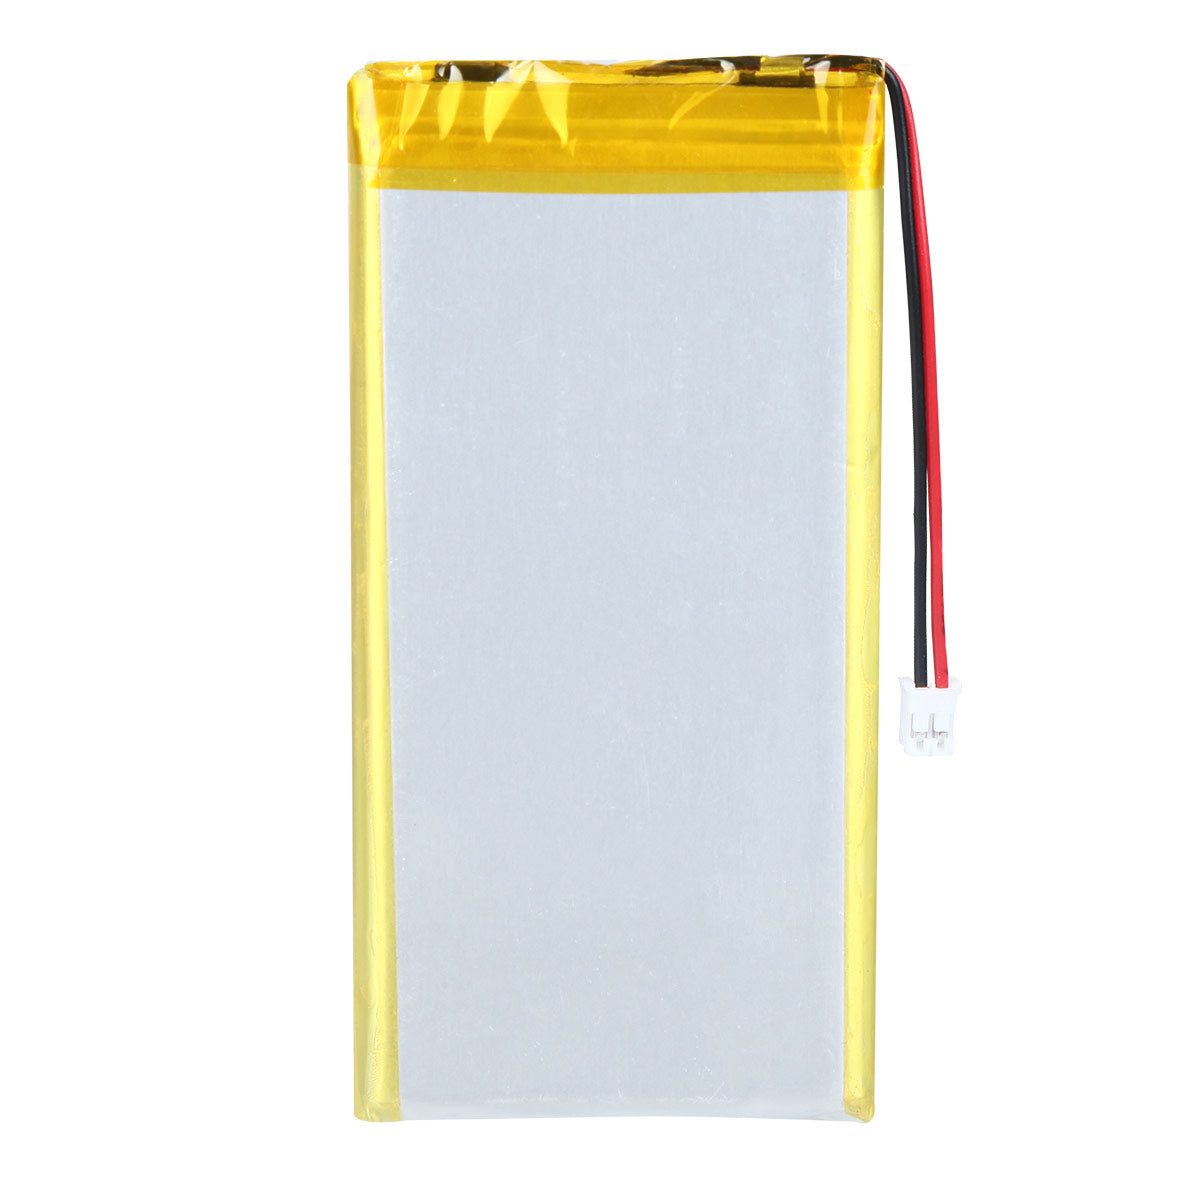 YDL 3.7V 4000mAh 6050100 Rechargeable Lithium Polymer Battery